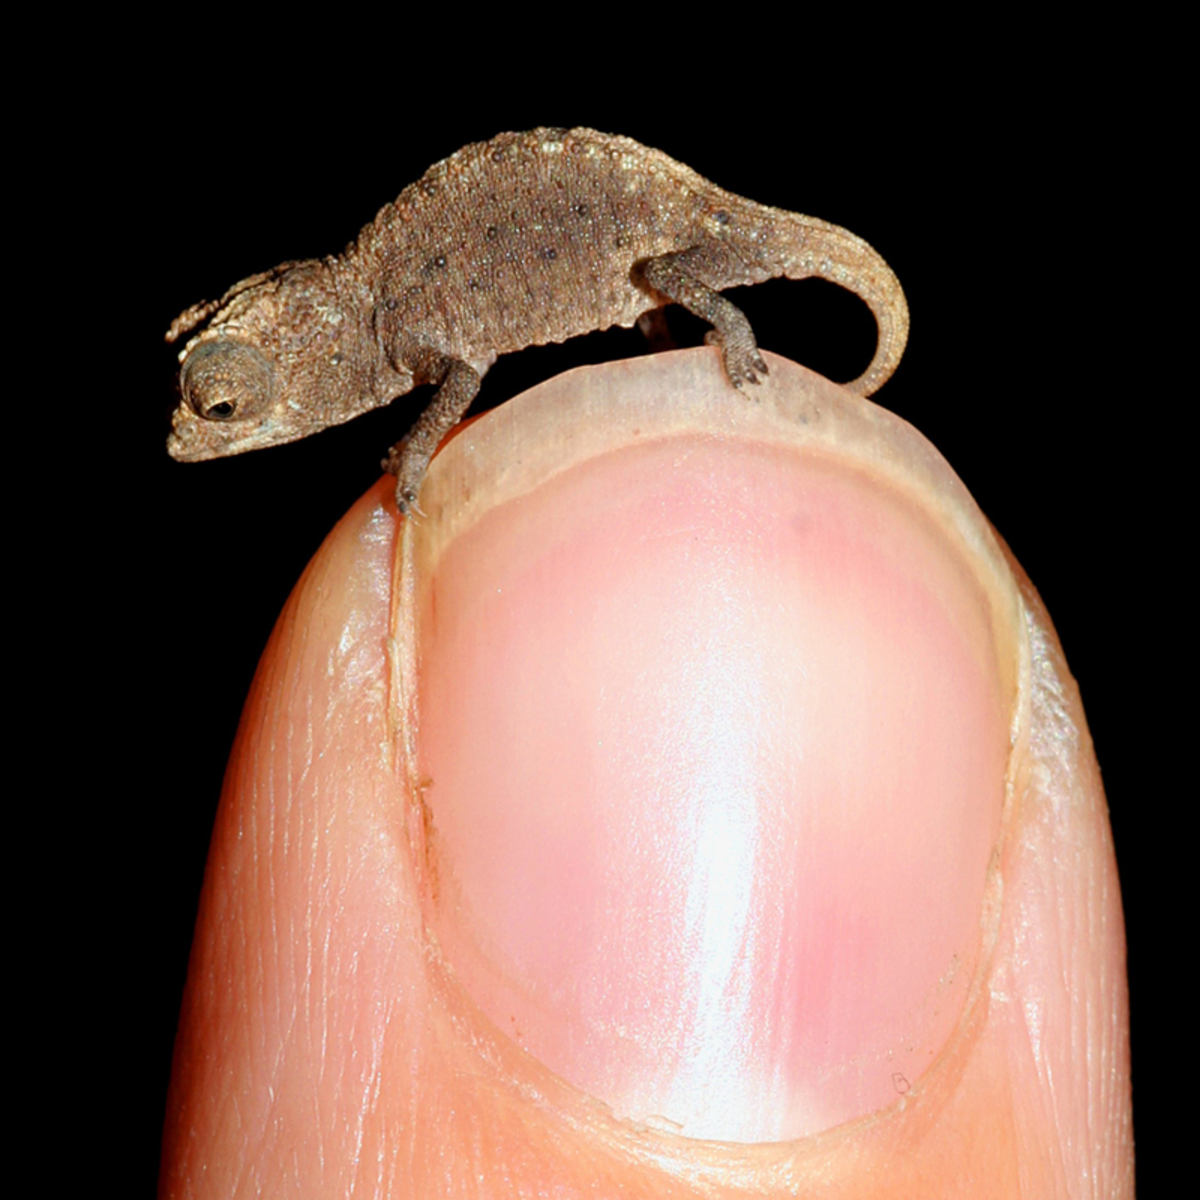 The smallest living reptile is the dwarf gecko. Adults are only 16mm long.